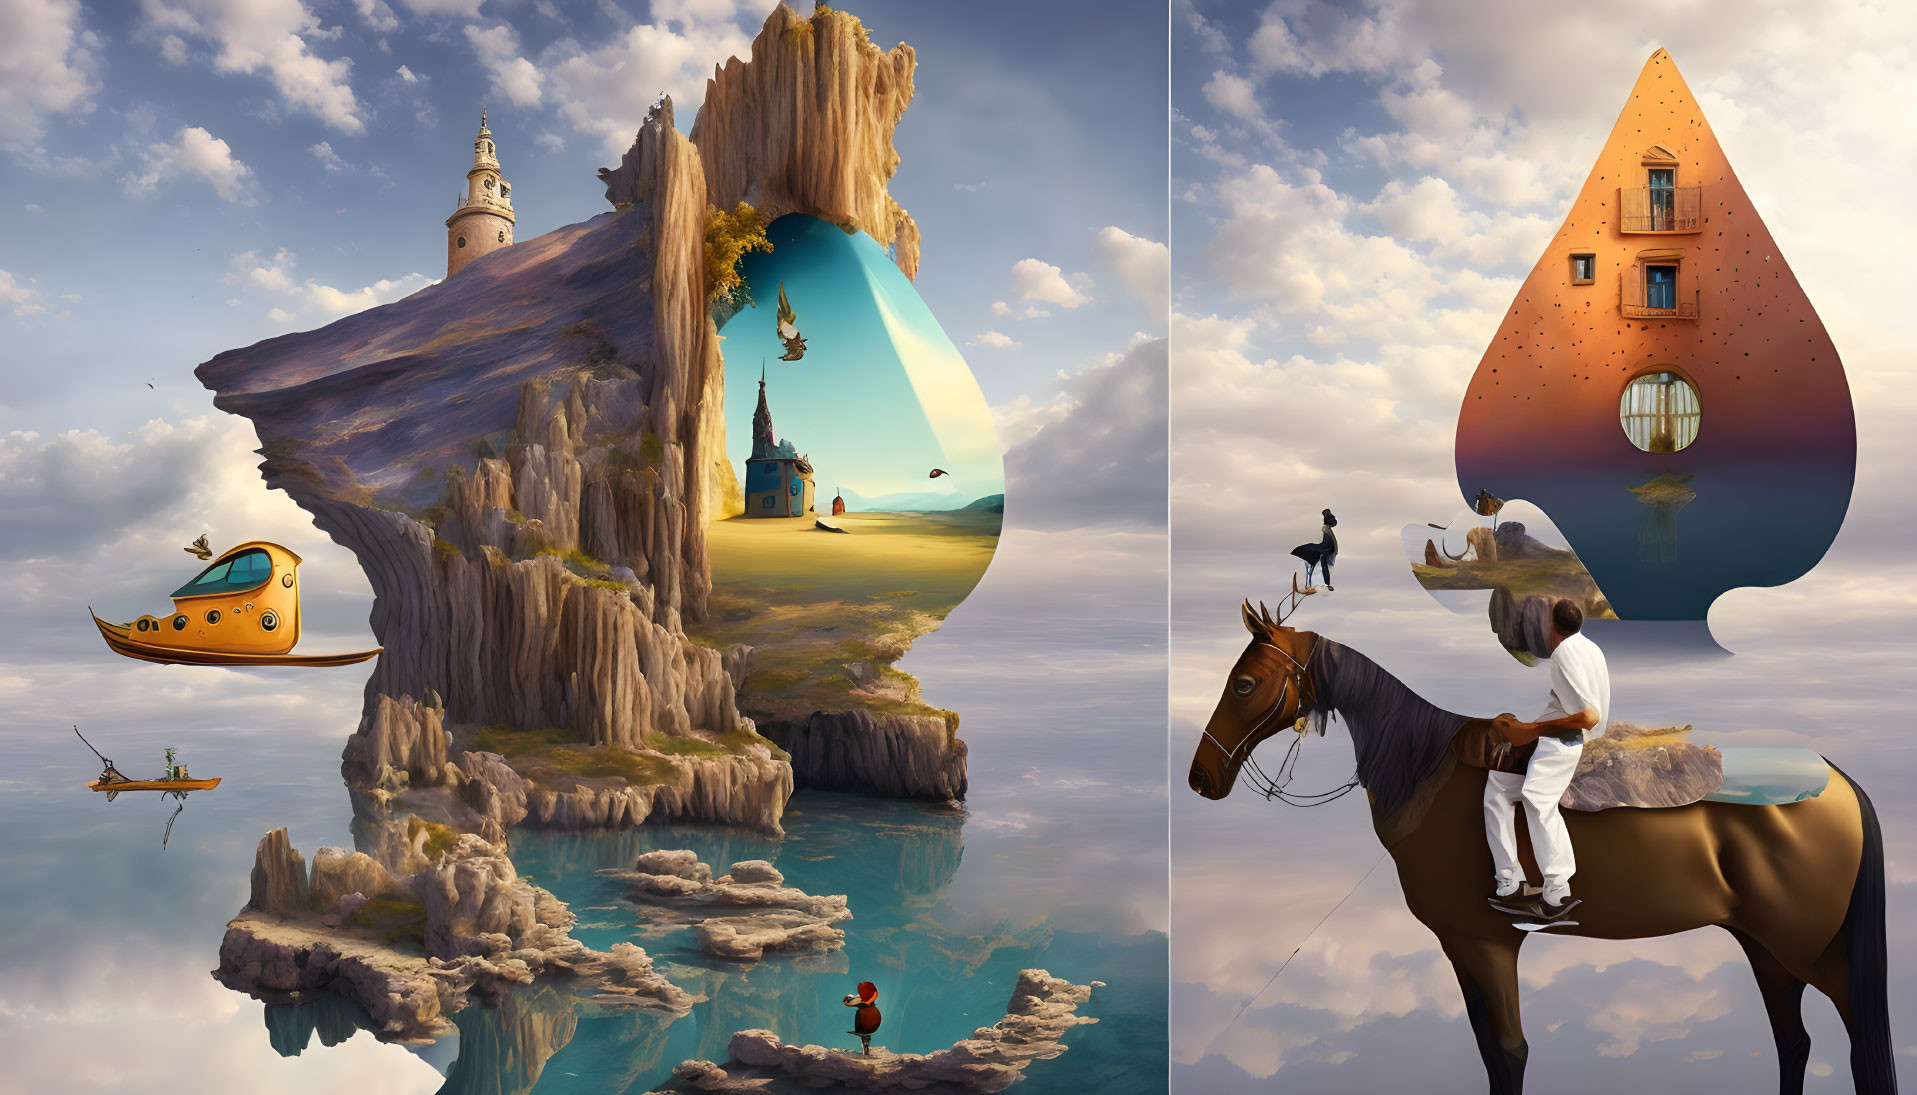 Surreal artwork with man on horse, lighthouse, floating house, and yellow submarine